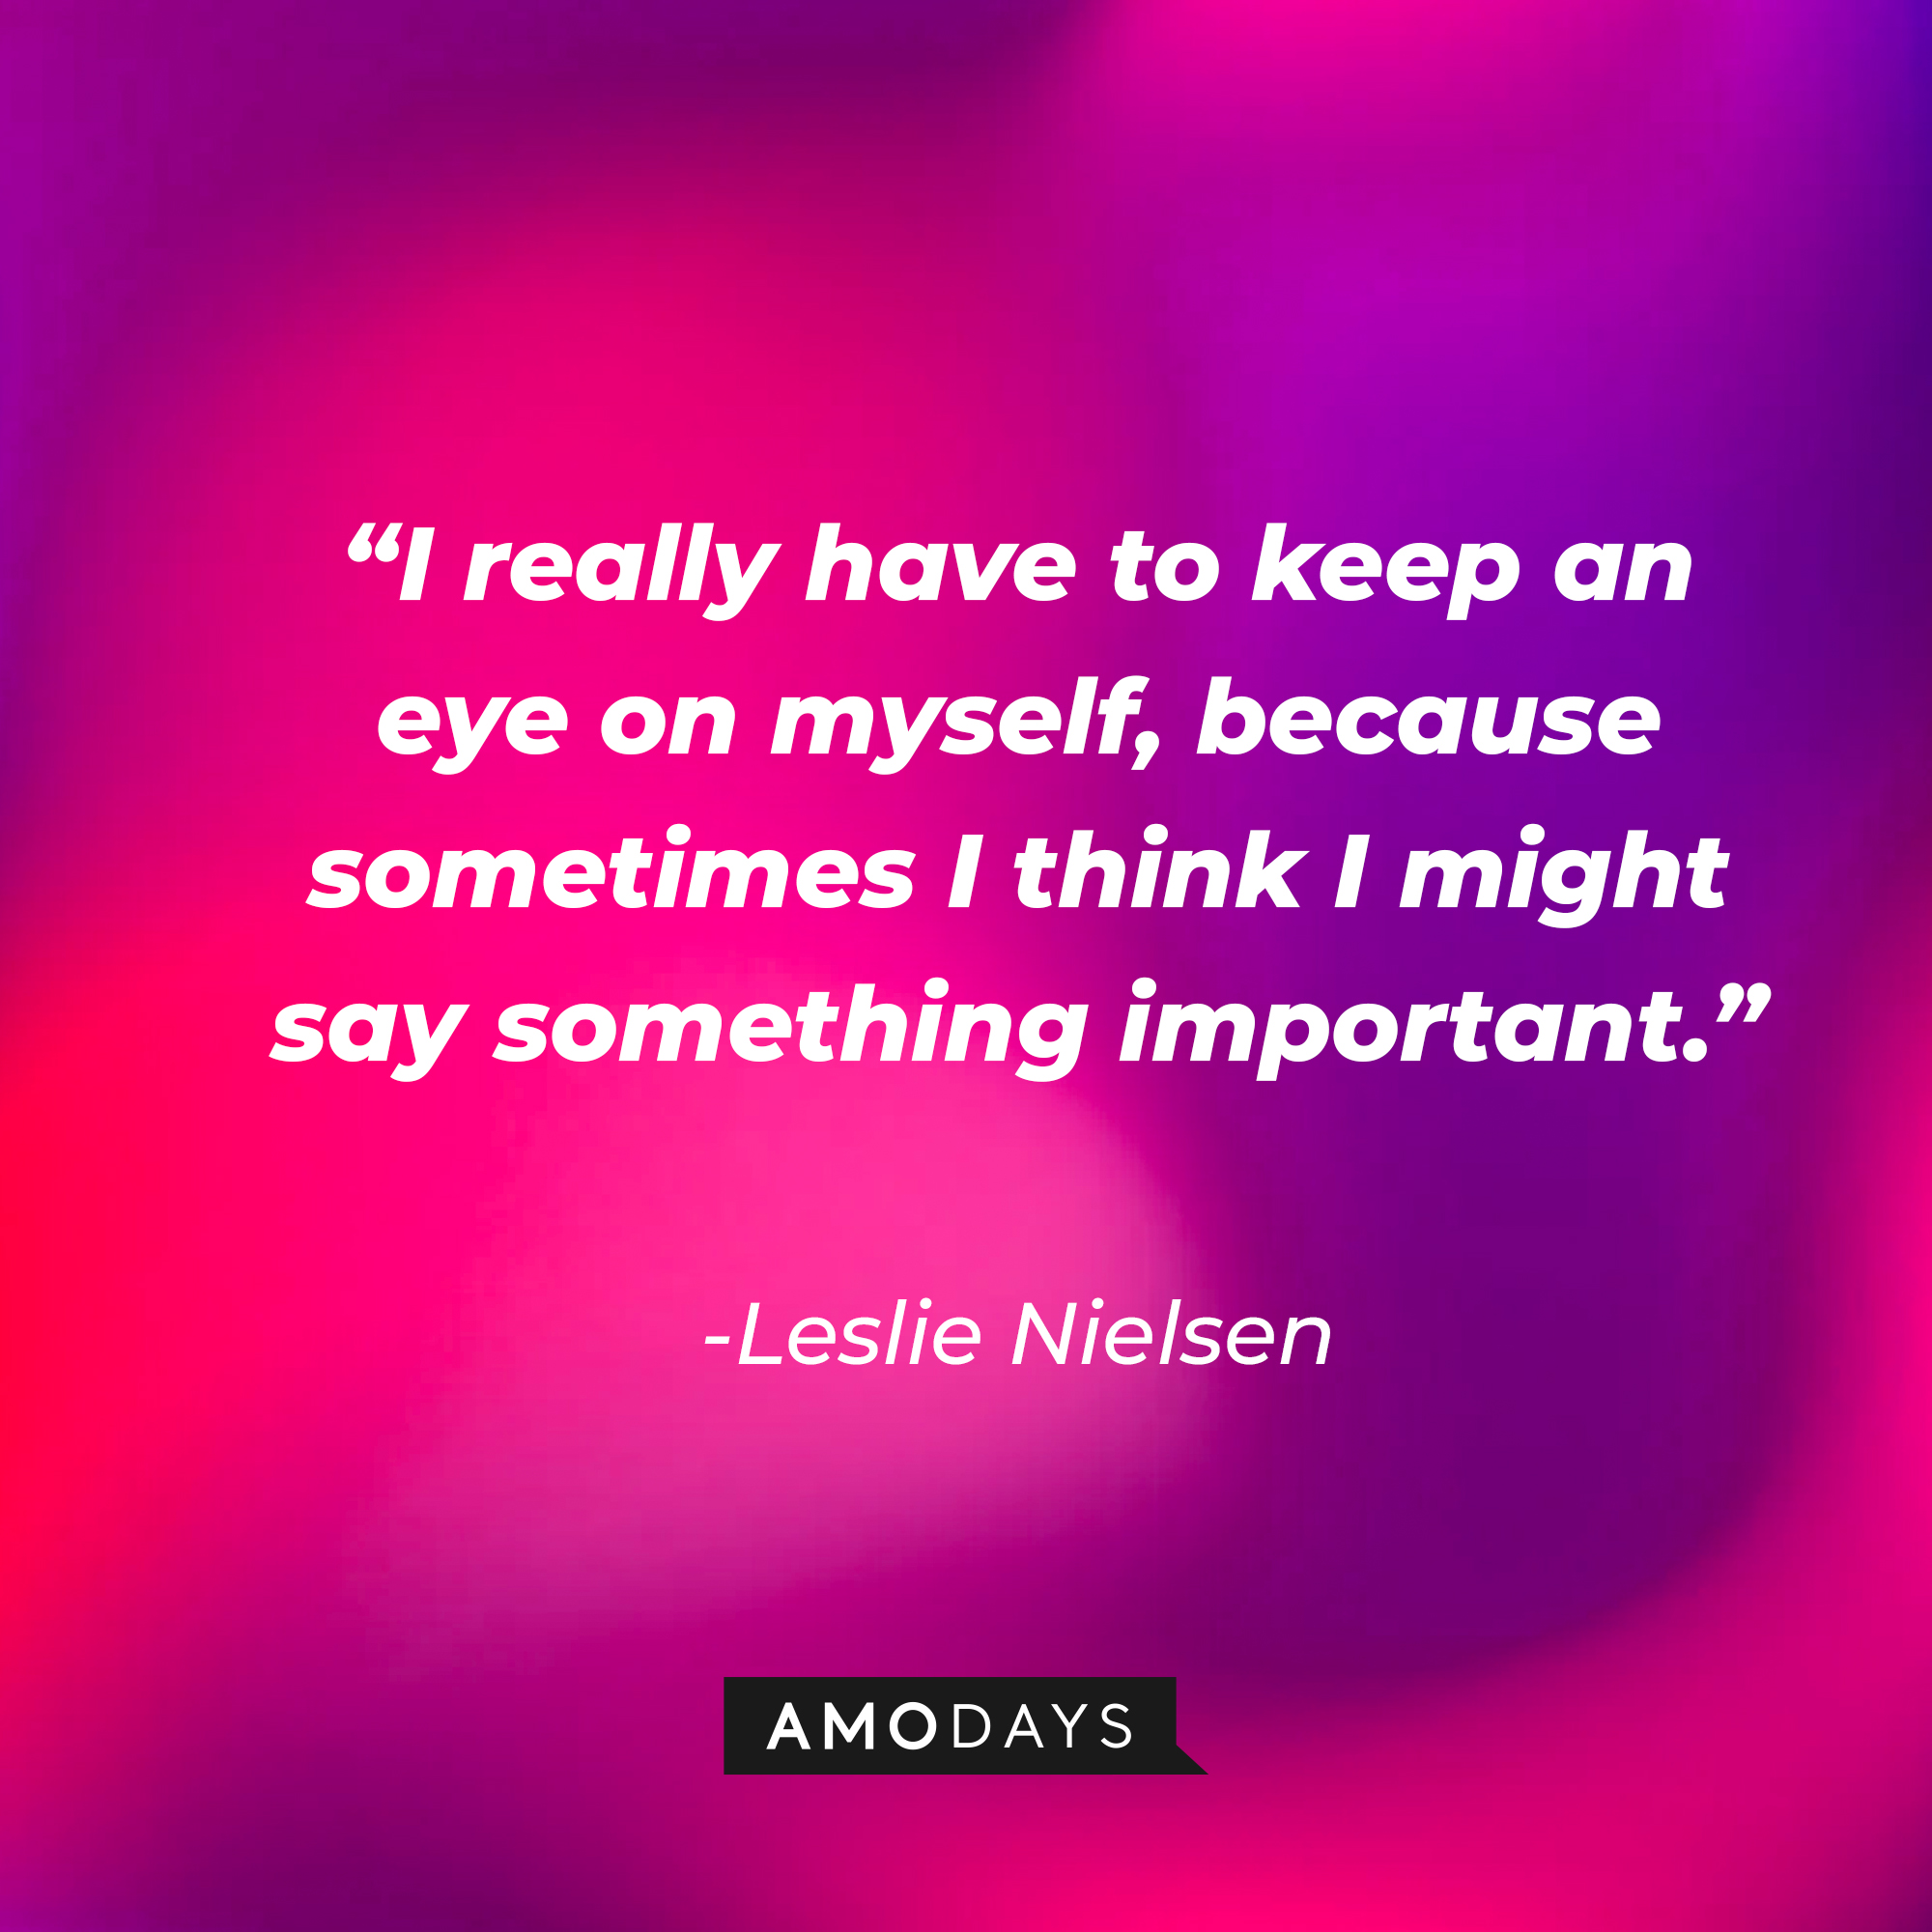 Leslie Nielsen's quote: "I really have to keep an eye on myself, because sometimes I think I might say something important." | Source: Amodays